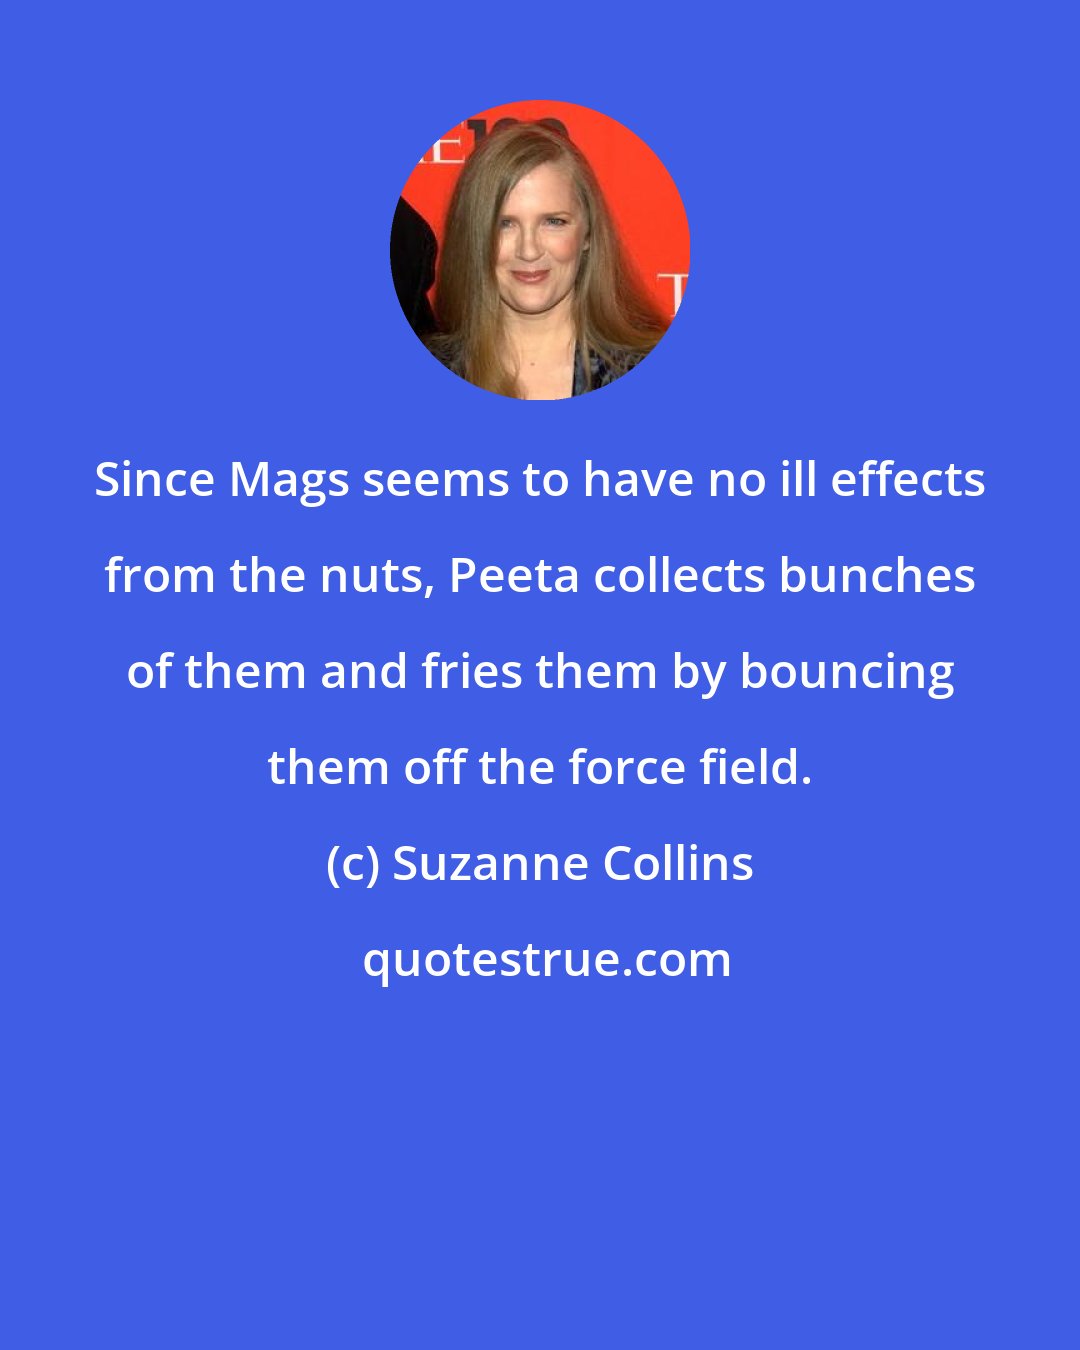 Suzanne Collins: Since Mags seems to have no ill effects from the nuts, Peeta collects bunches of them and fries them by bouncing them off the force field.